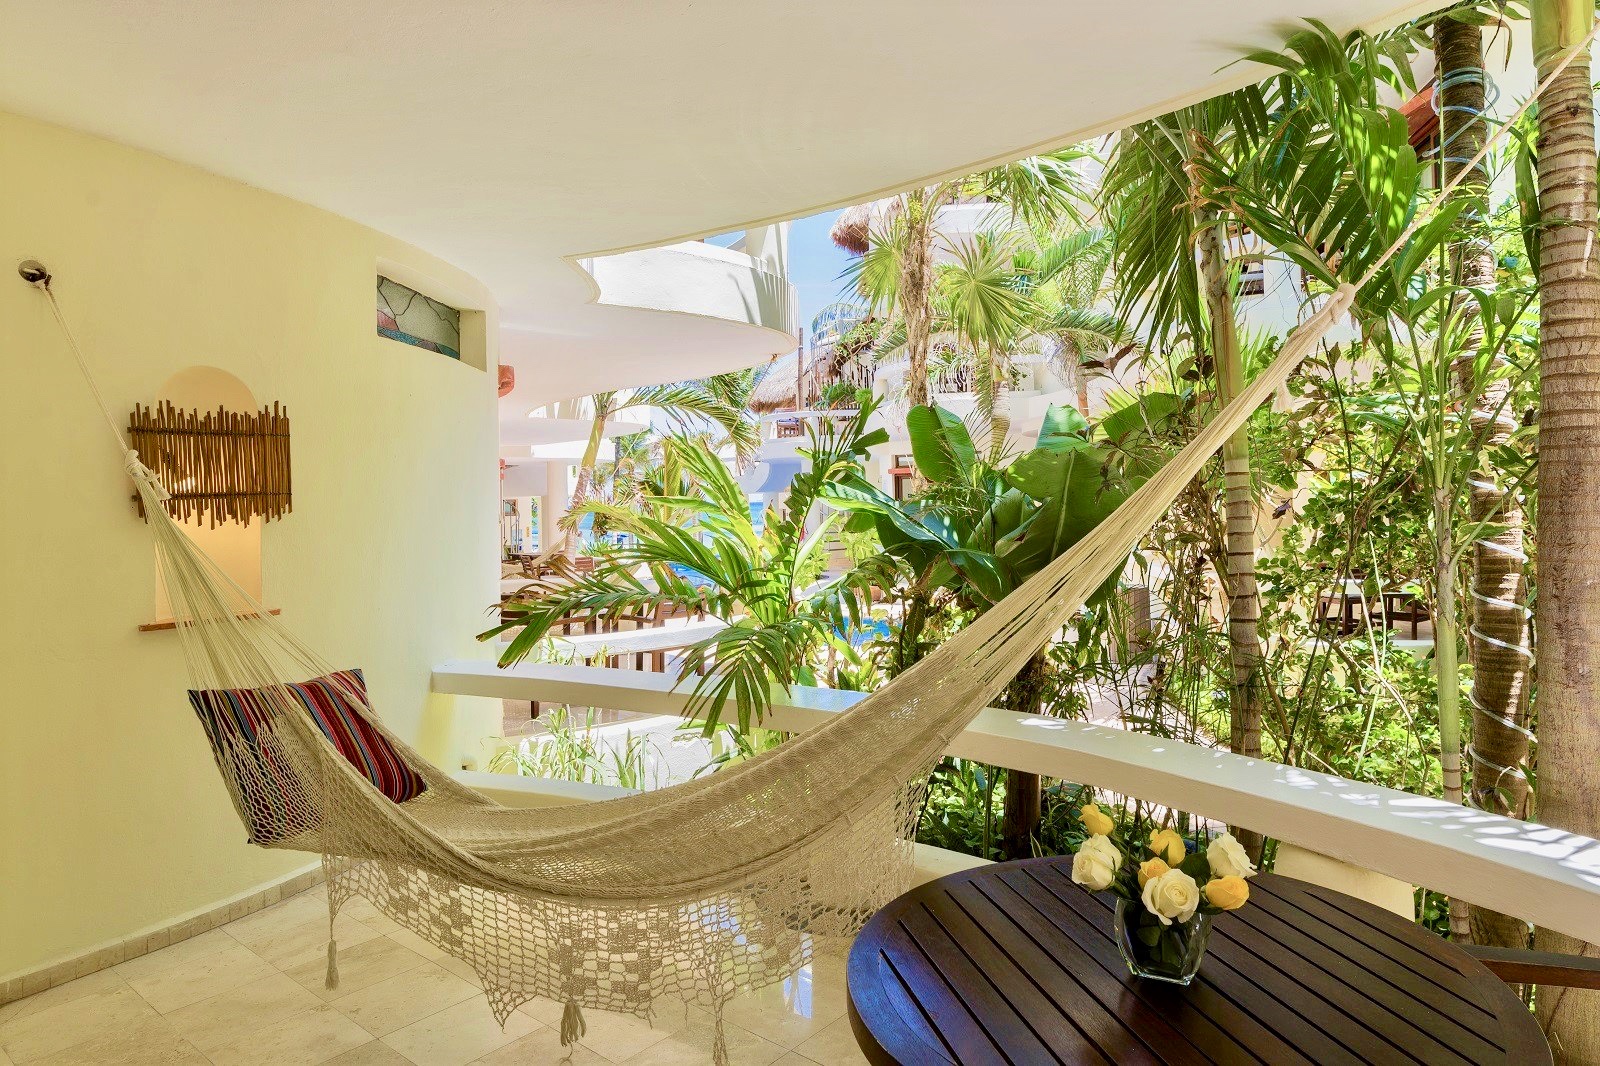 Private relaxing area.